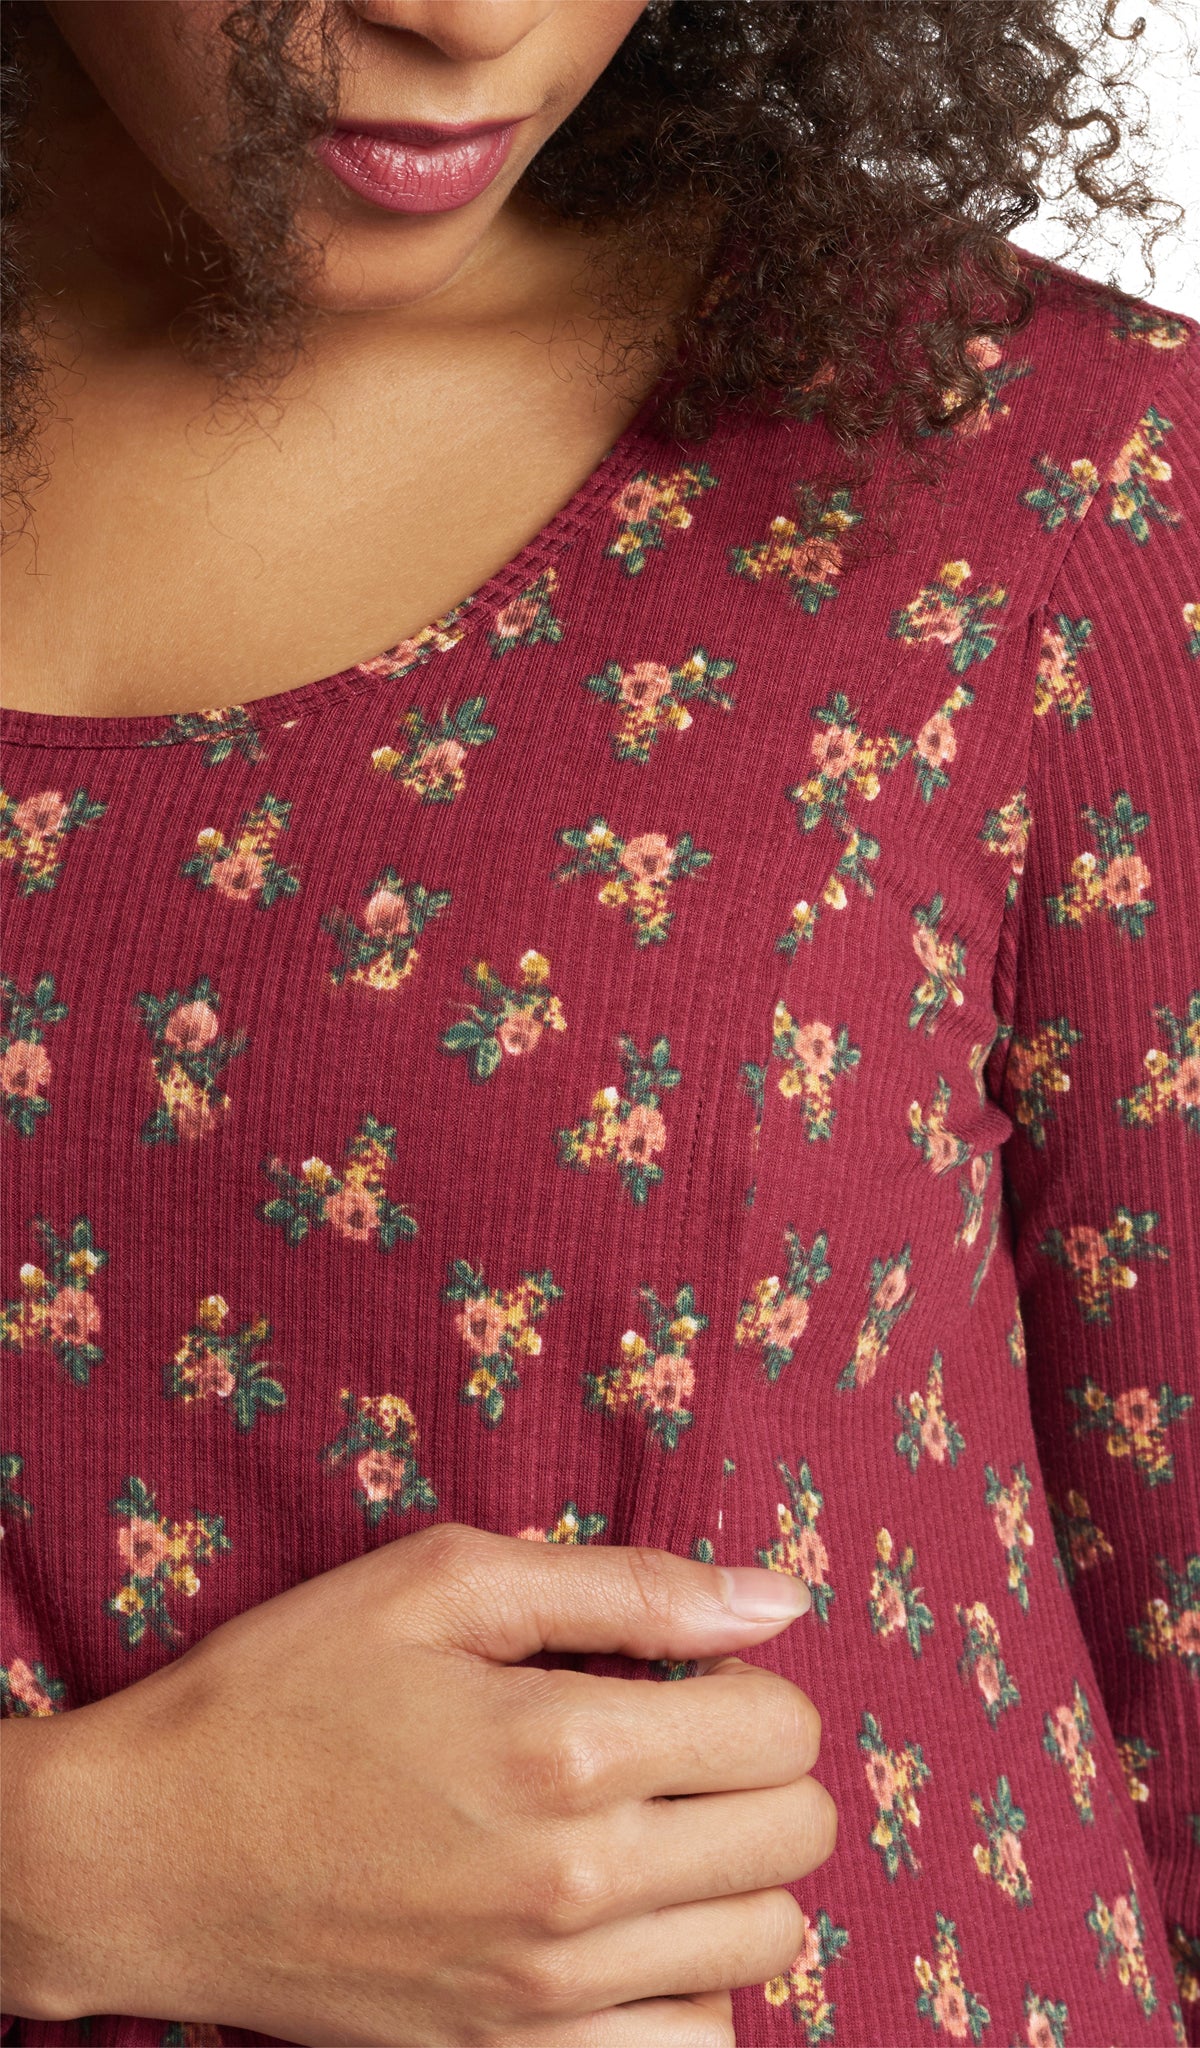 Burgundy Ditsy Adriana detail shot of woman pulling aside front panel for nursing access underneath.